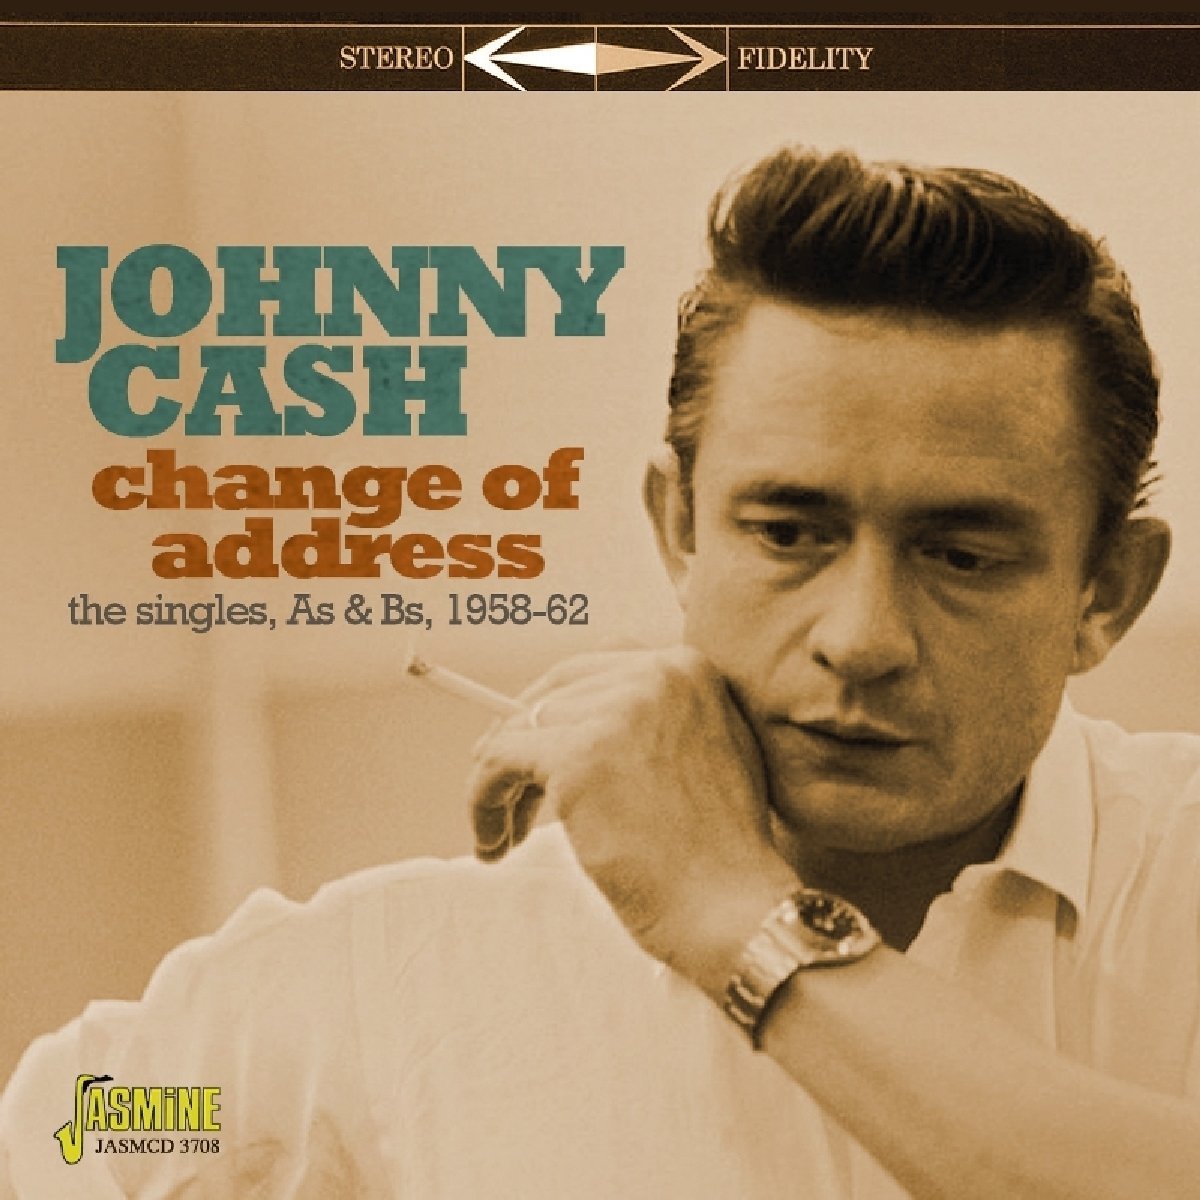 JOHNNY CASH / ジョニー・キャッシュ / CHANGE OF ADDRESS - THE SINGLES AS & BS 1958-1962